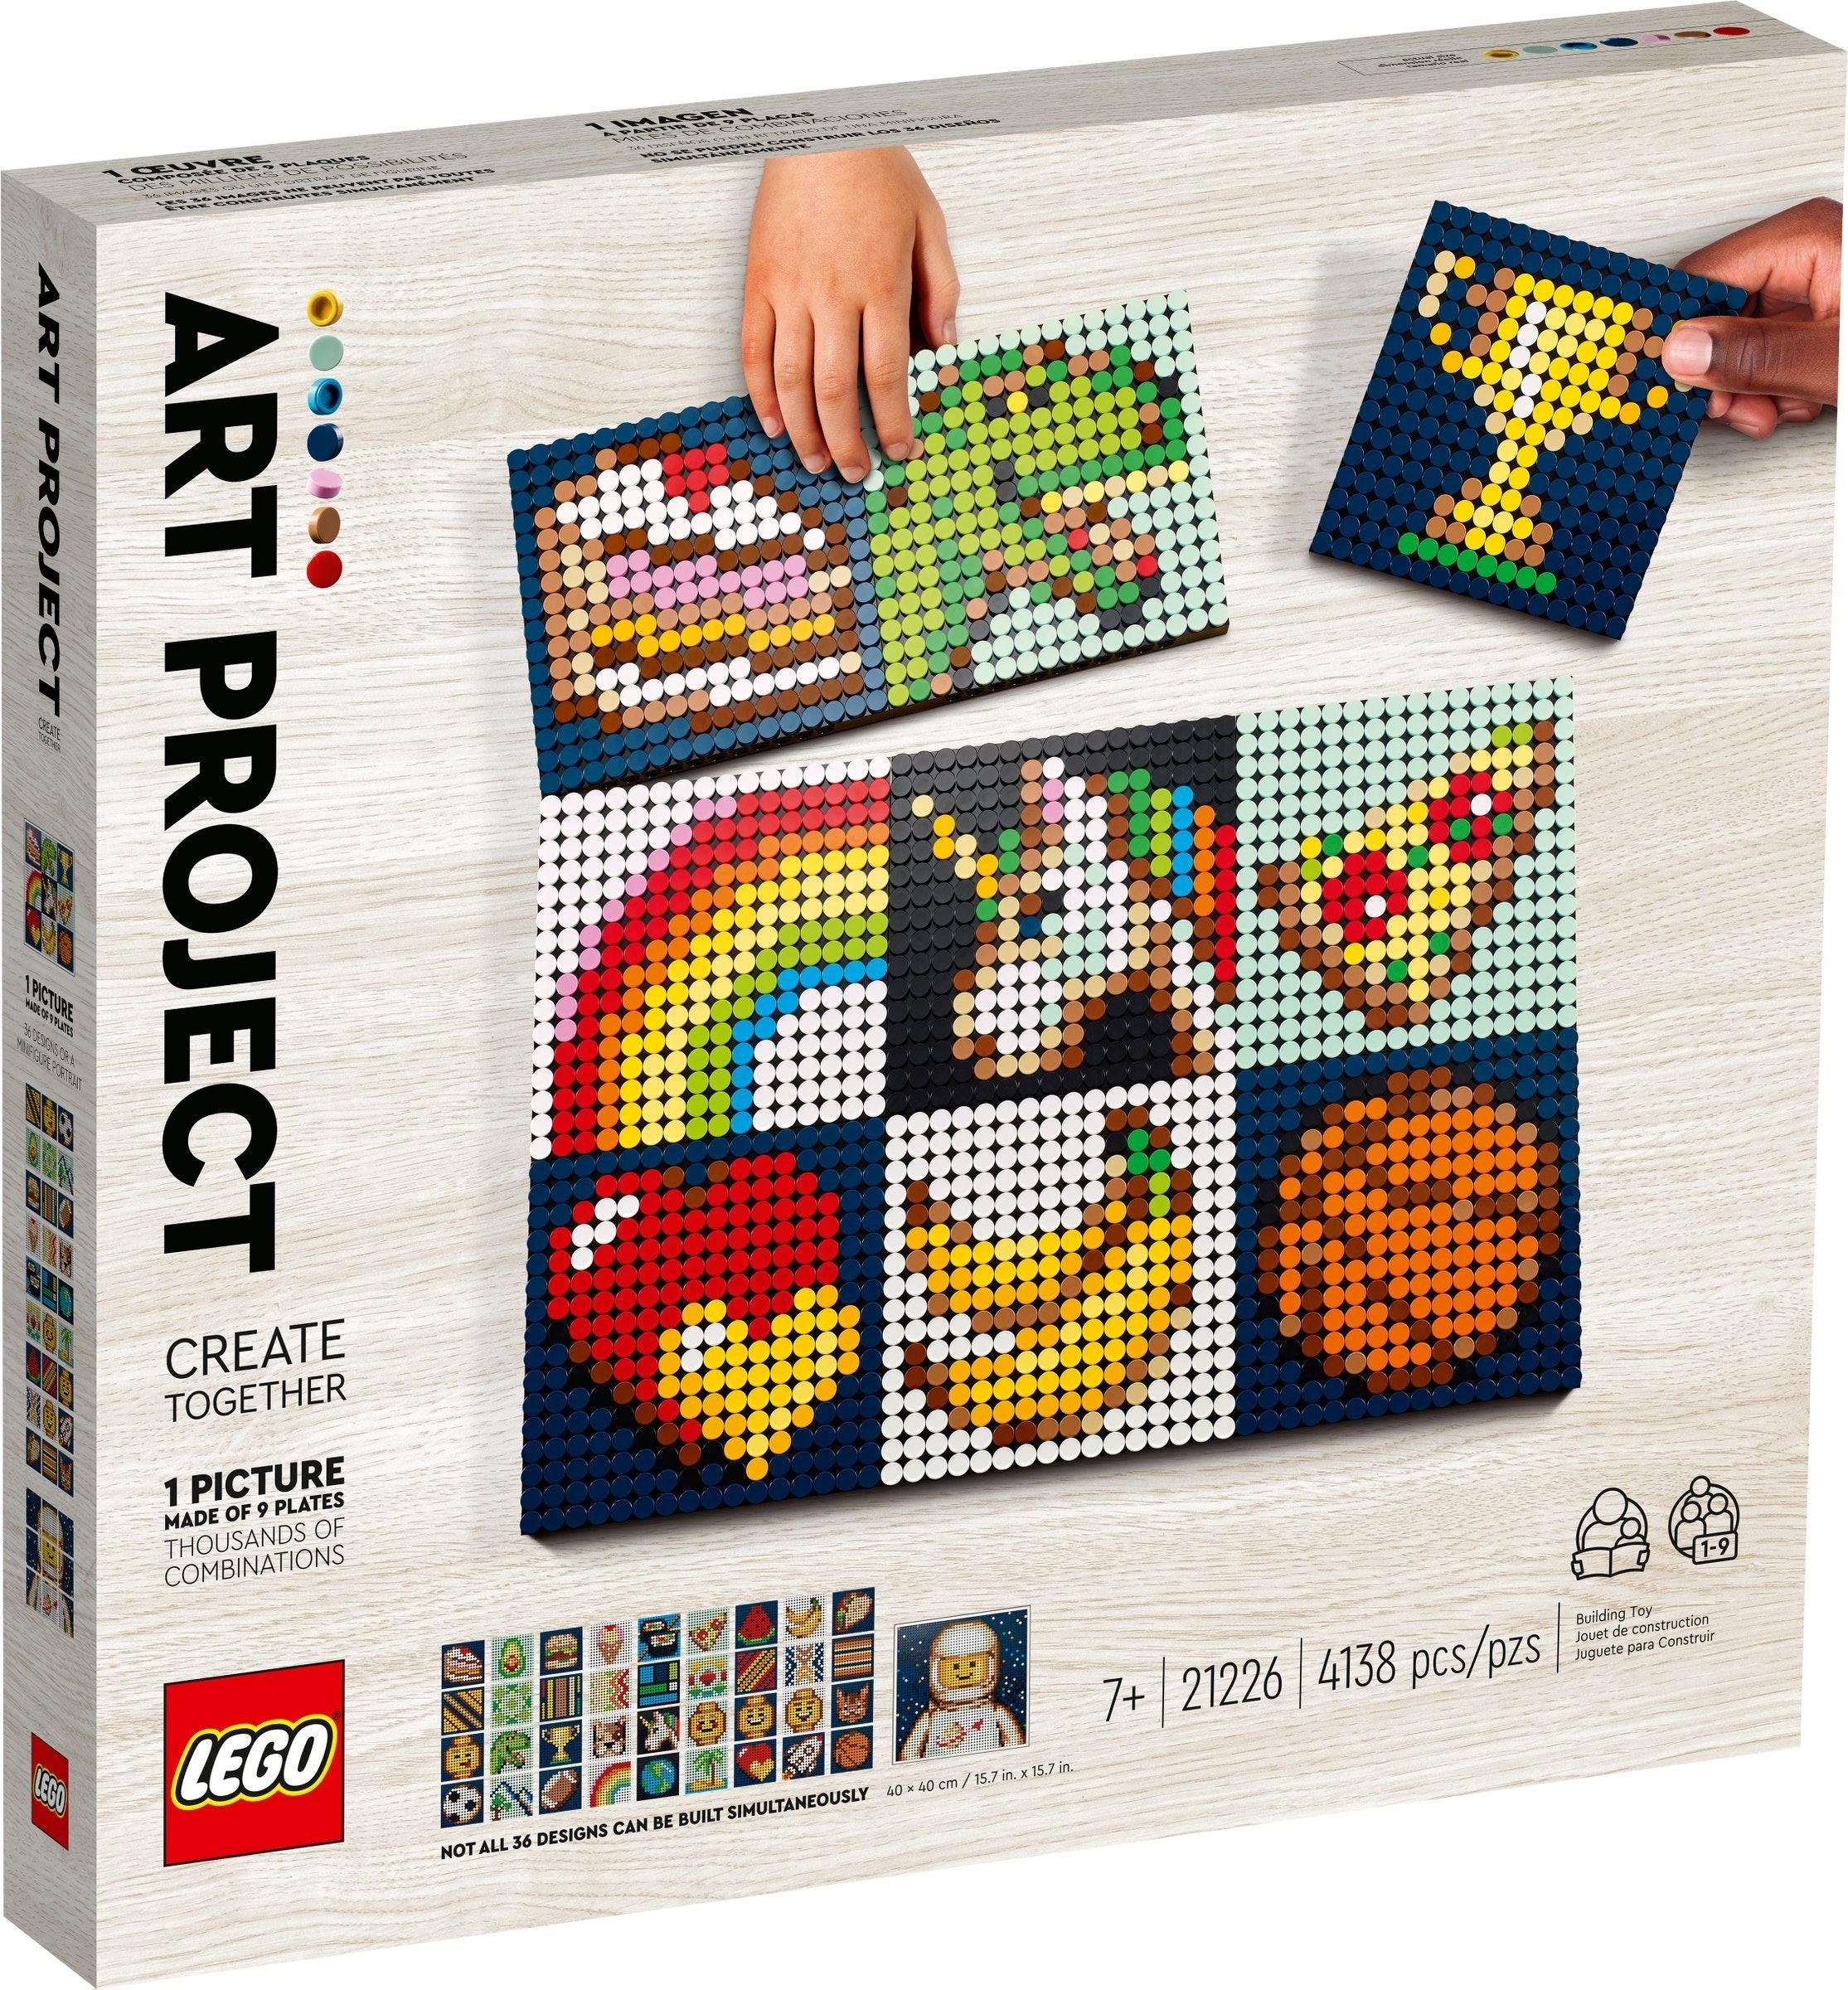 Lego Art 21226 - Art Project - Create Together